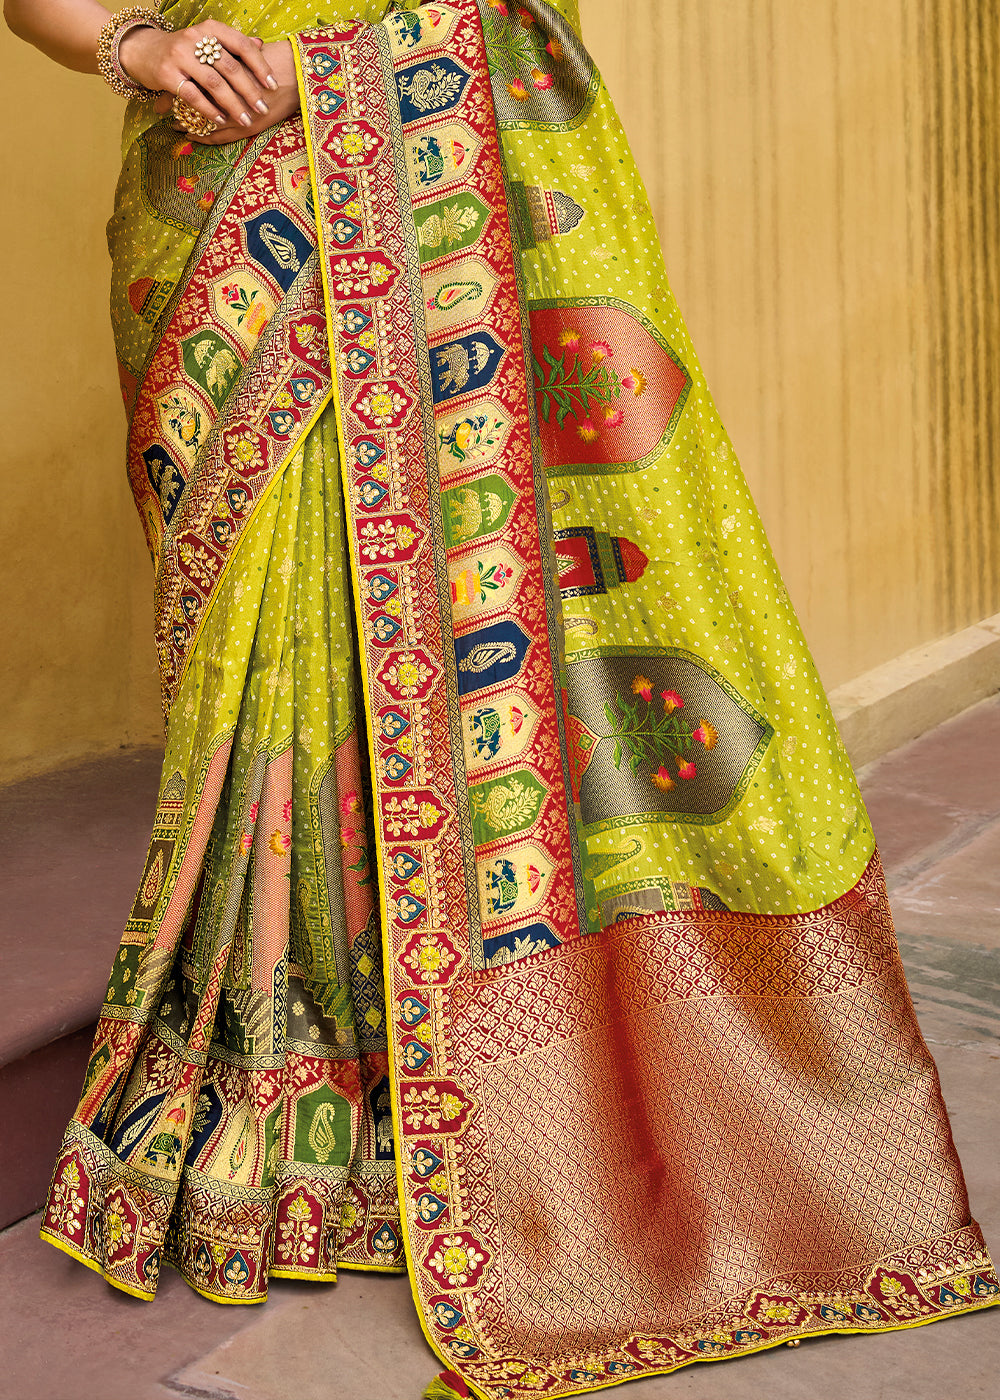 Lime Green Dola Silk Saree with Beautiful Embroidery work: Wedding Edition